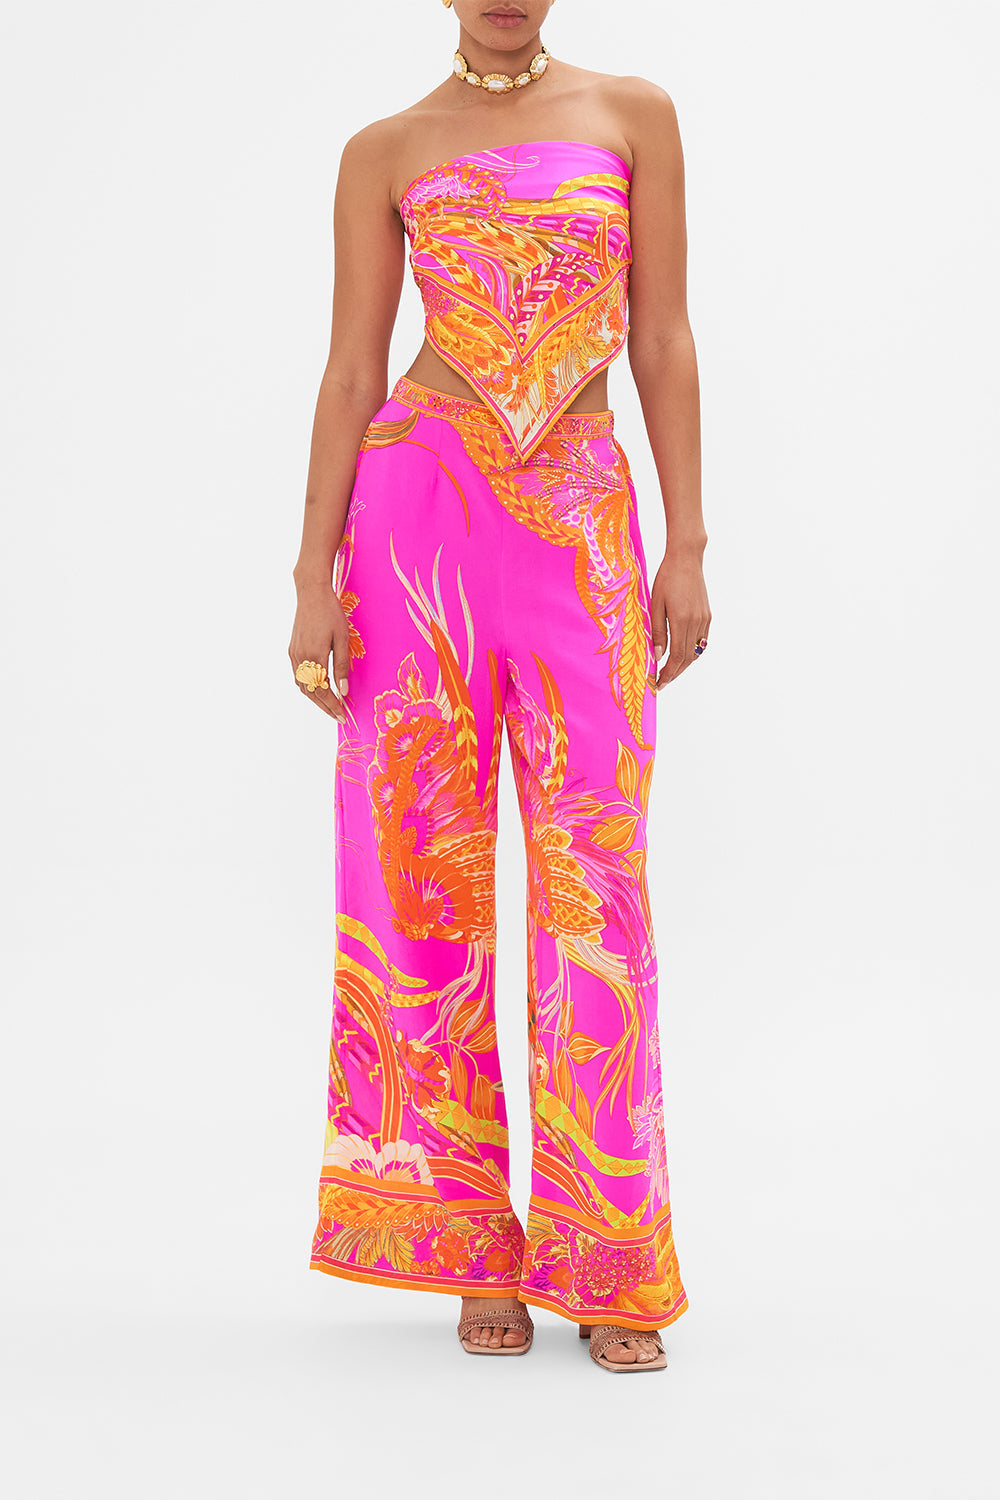 Front view of model wearing CAMILLA silk wide leg pant in A Heart That Flutters print